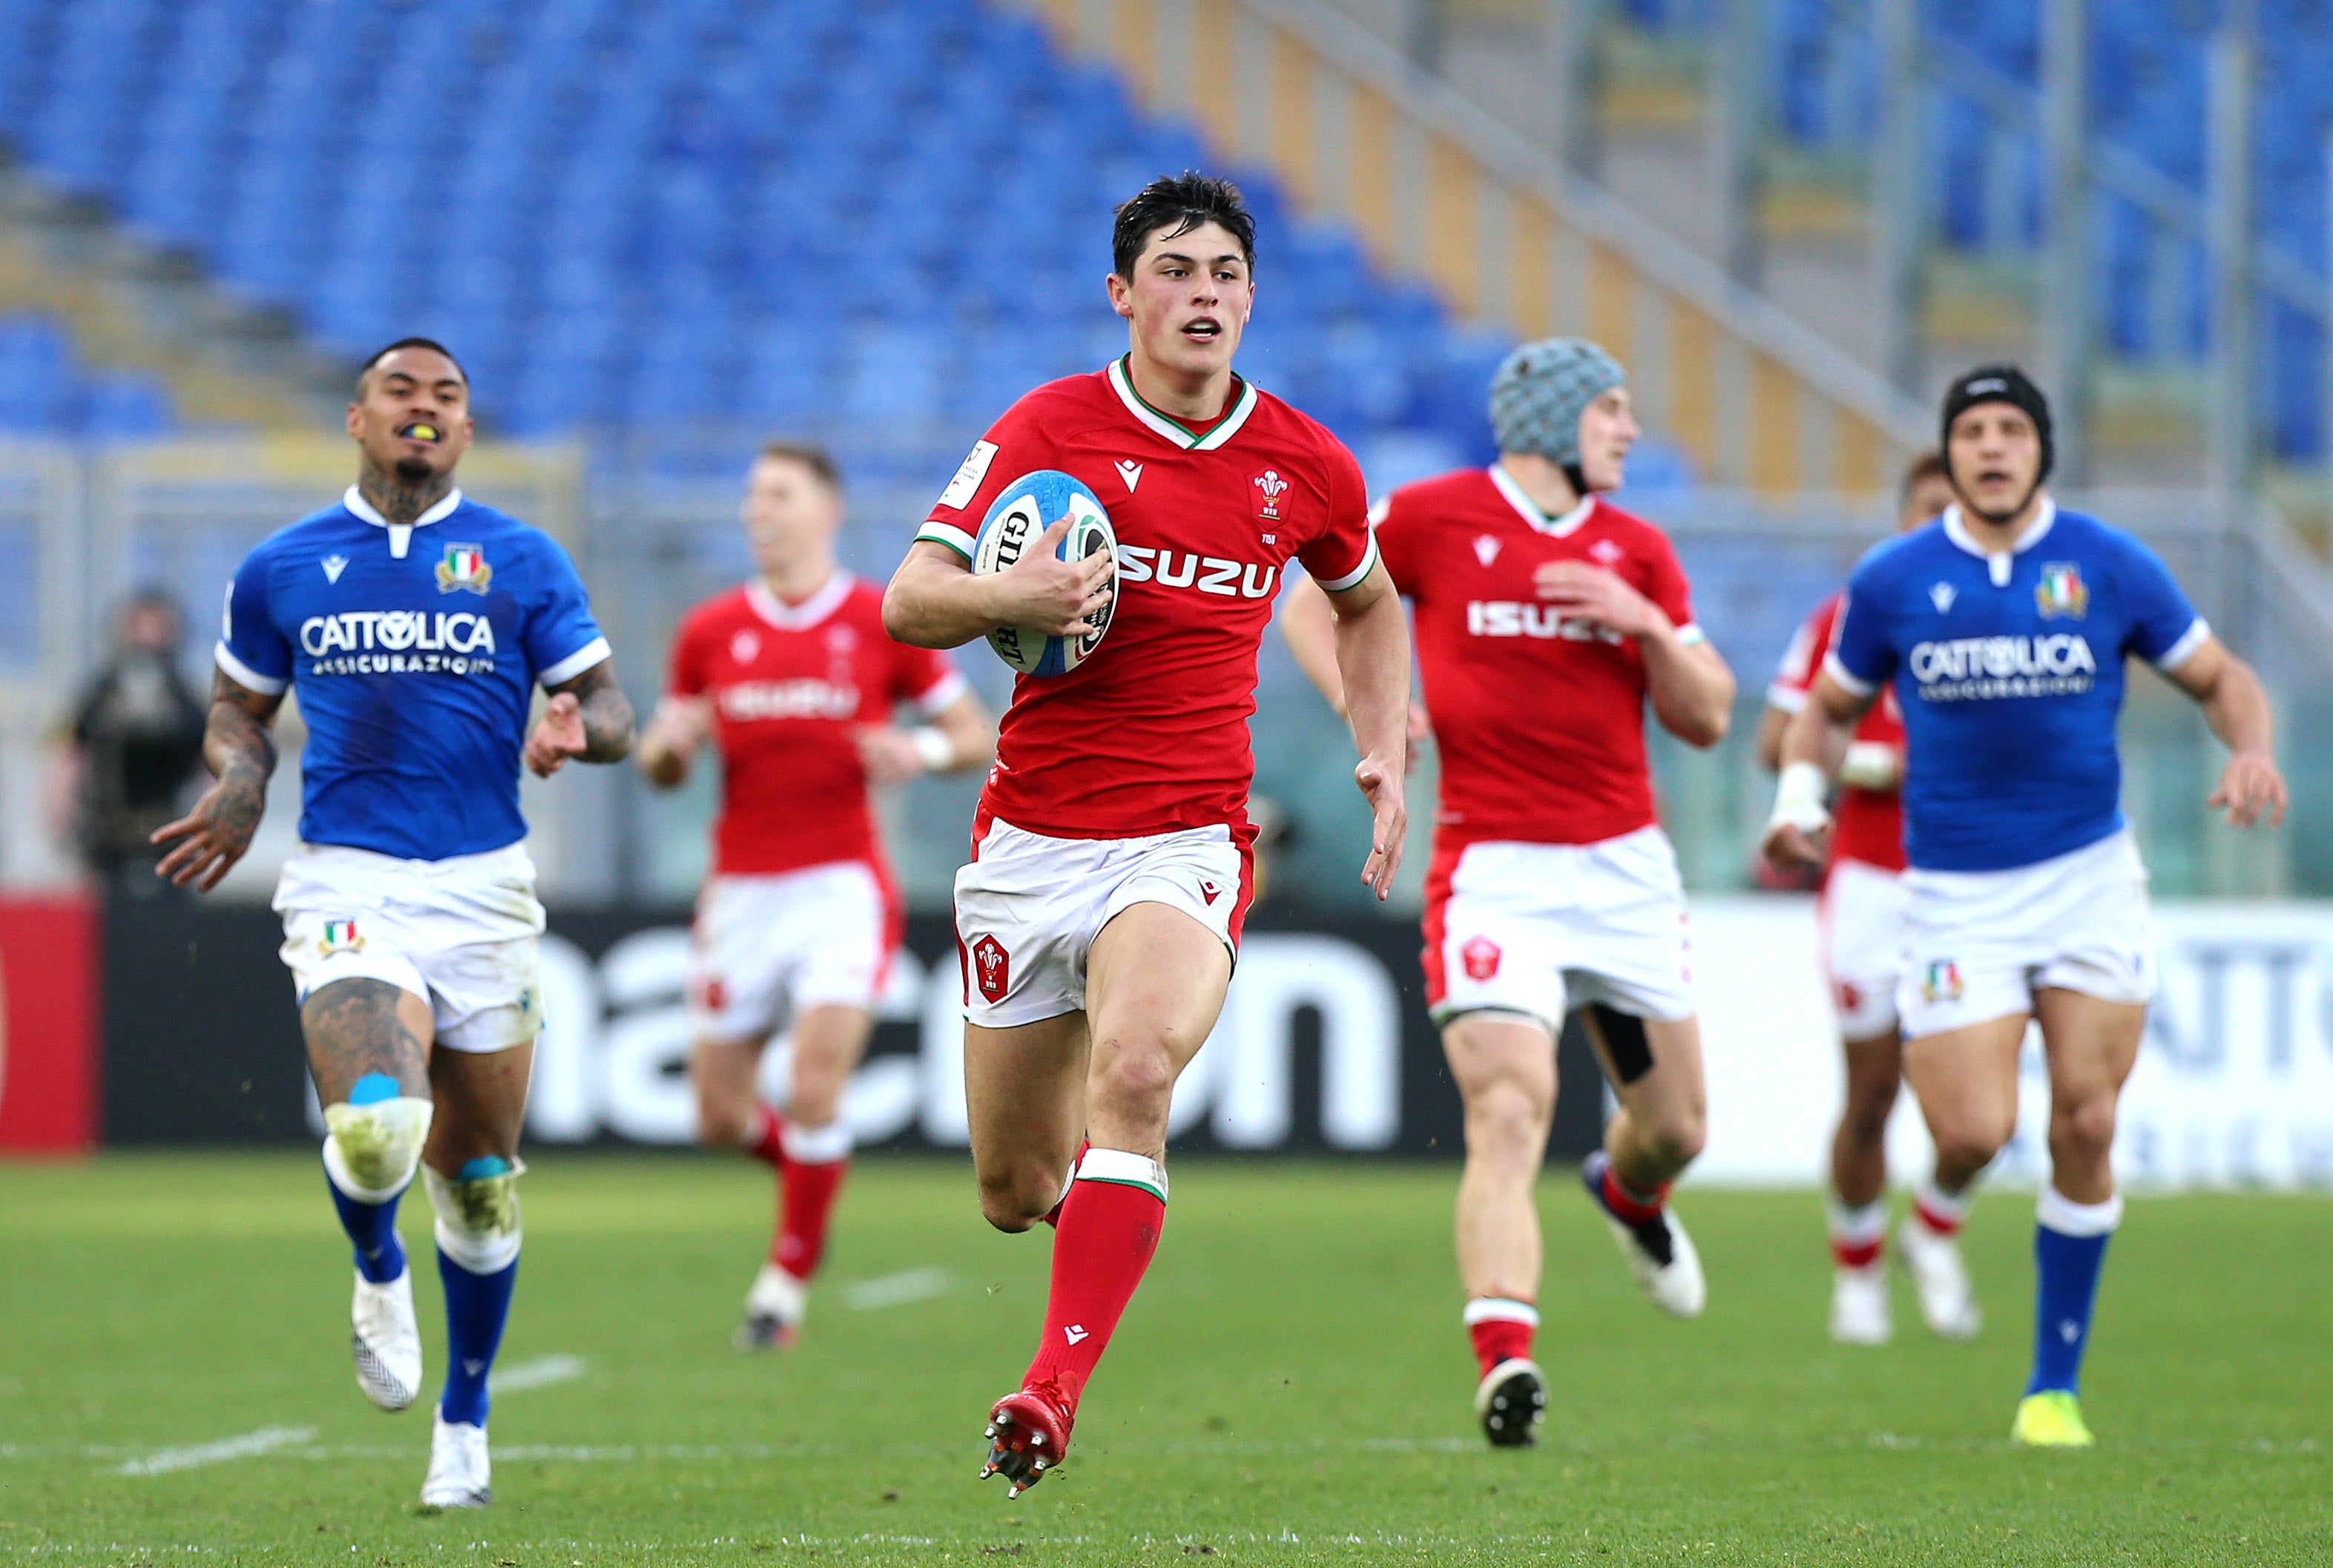 Louis Rees-Zammit scored a great try against Italy